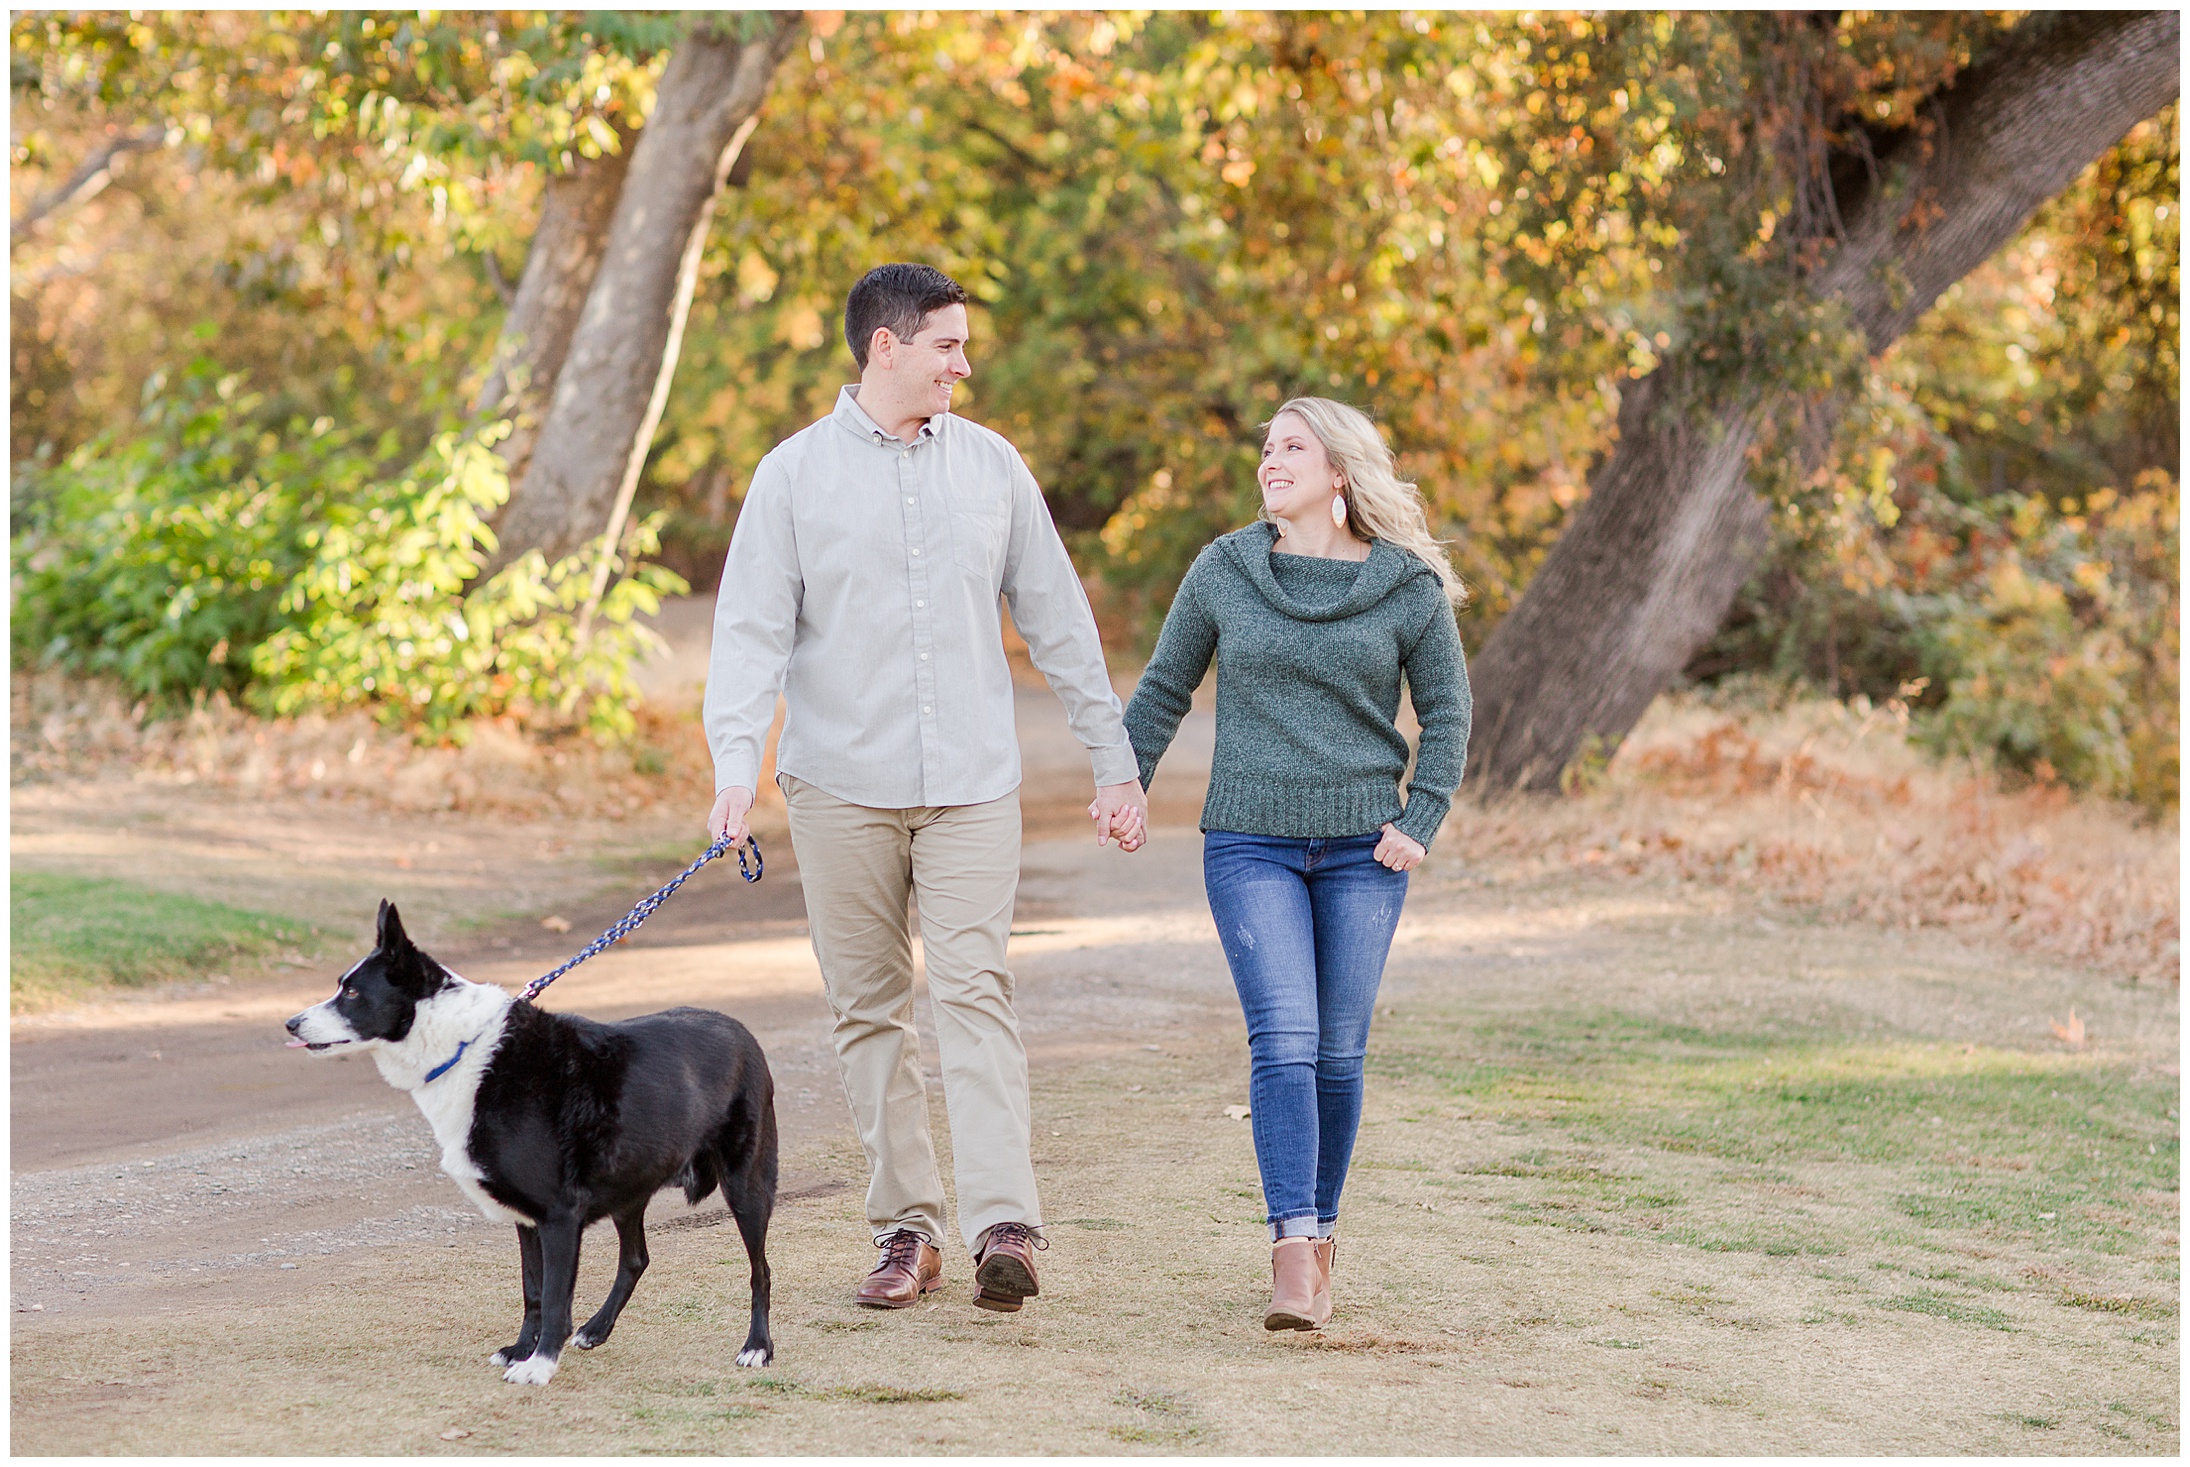 Bidwell Golf Couse Sunset Engagement Session Chico California,